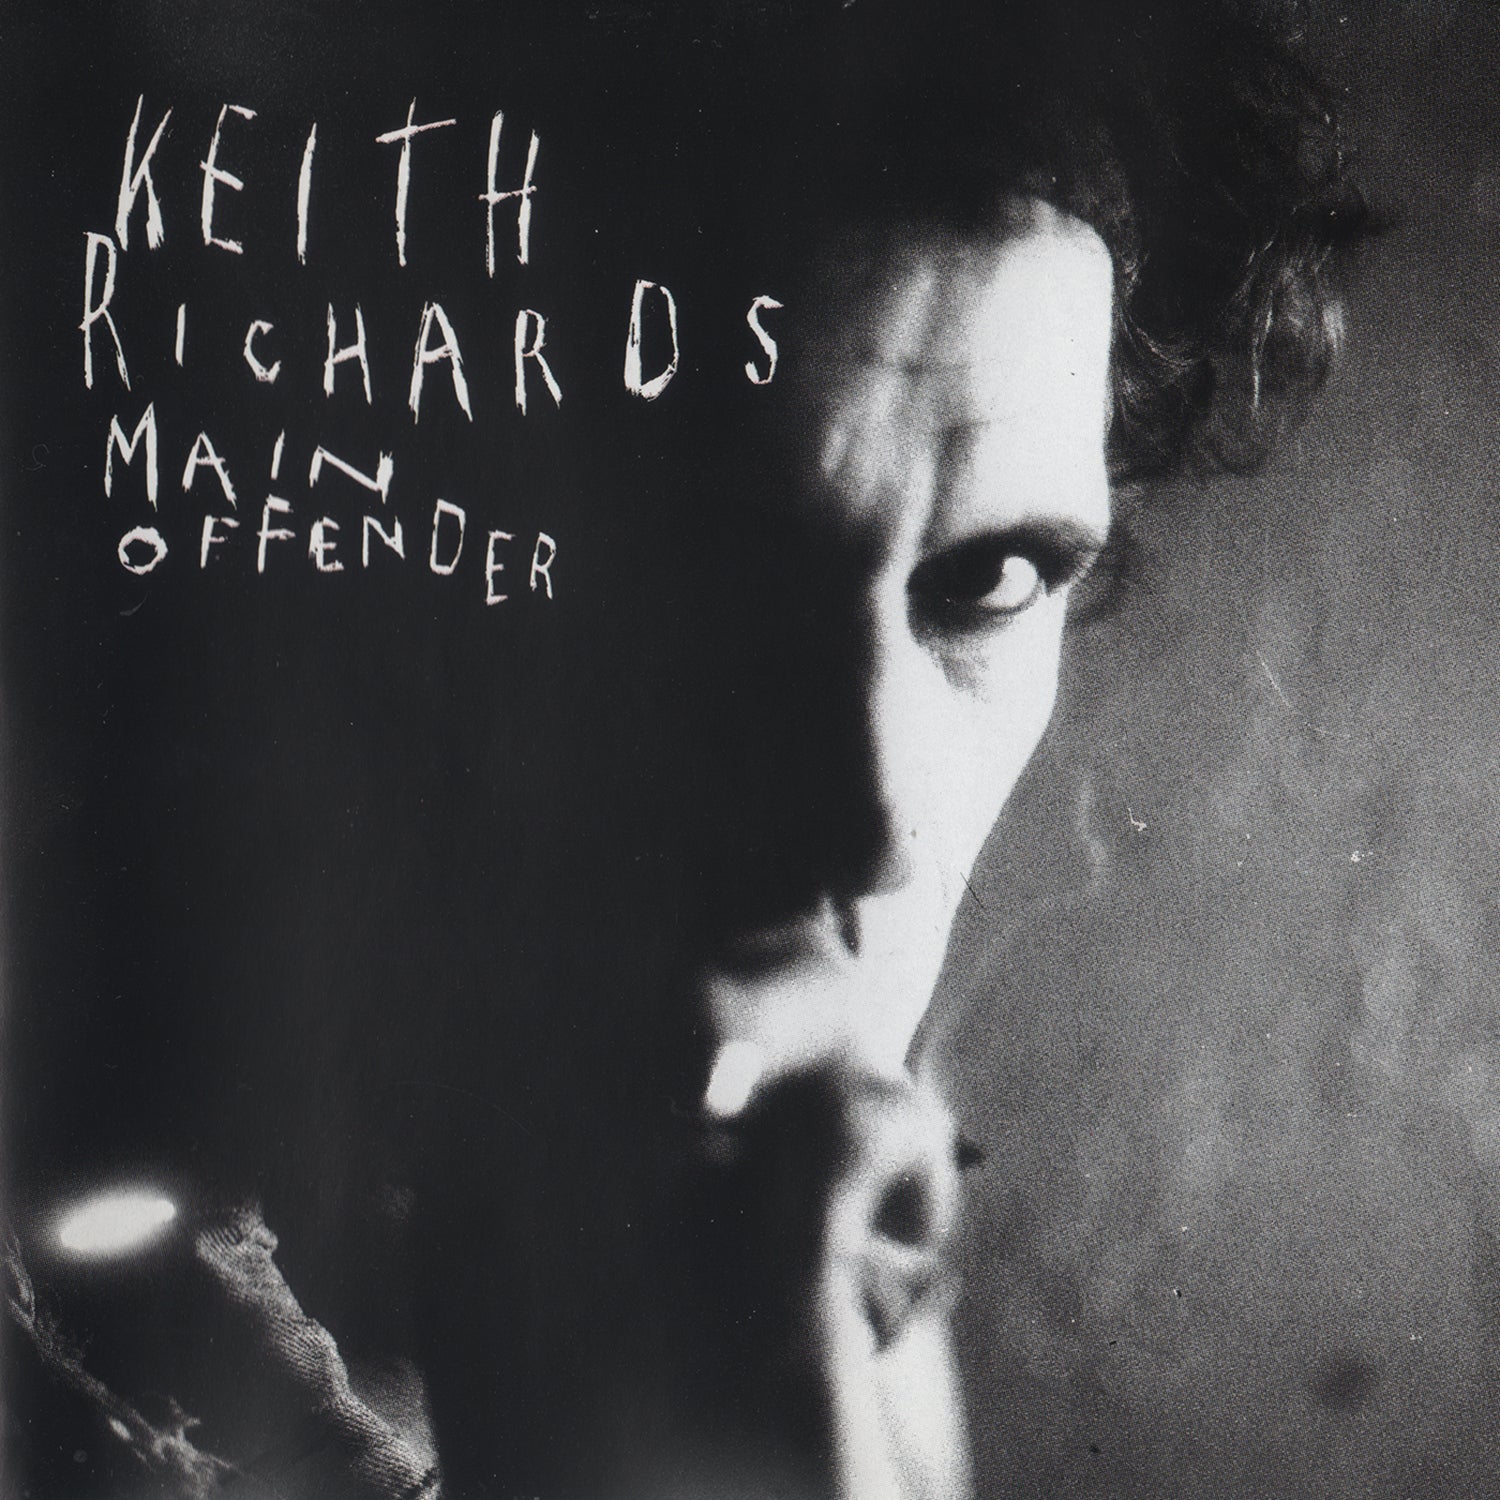 Keith Richards | Main Offender (Deluxe Edition Boxset) | Vinyl